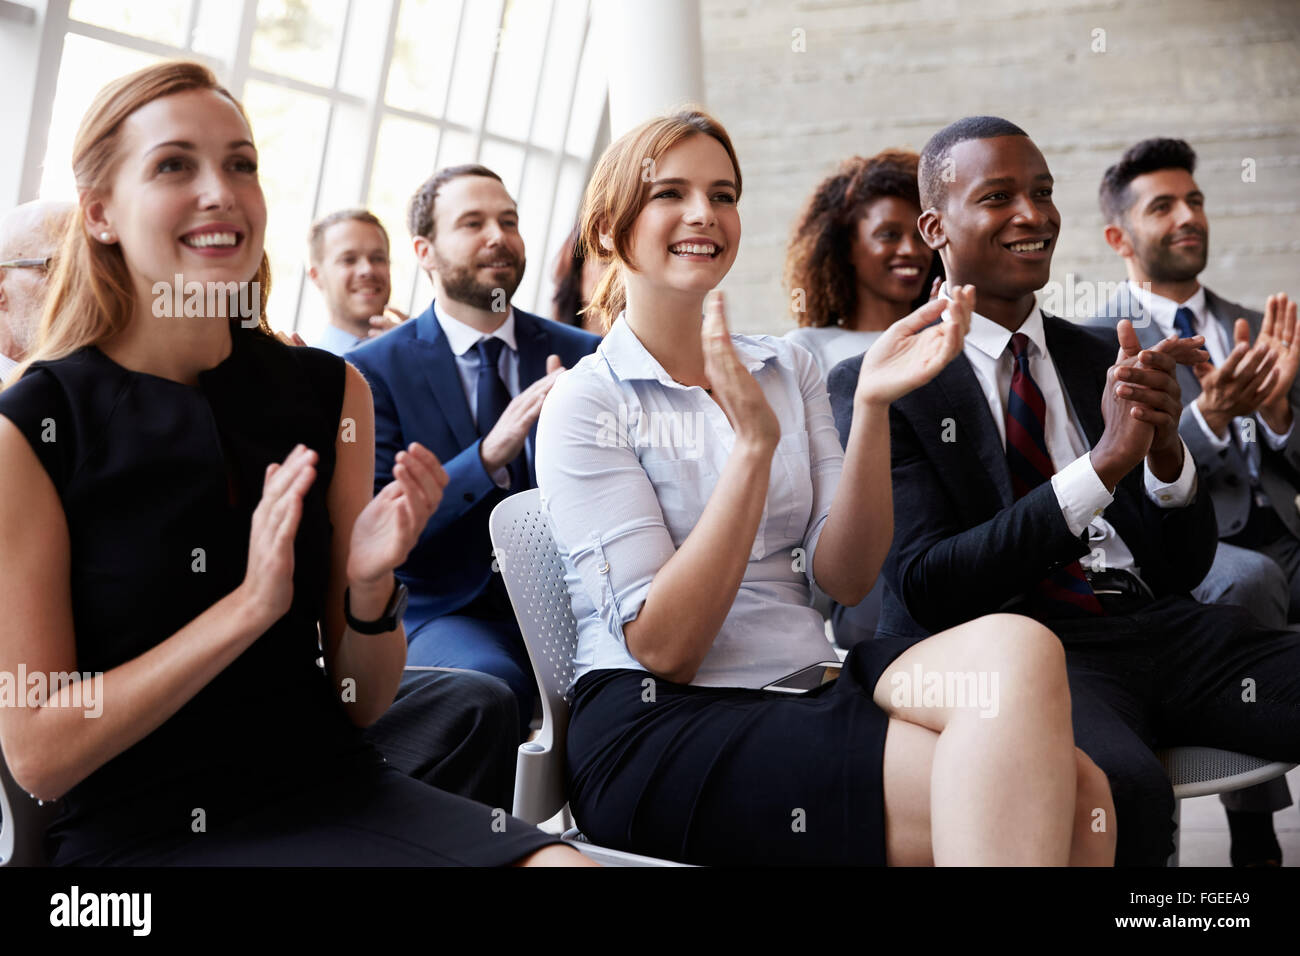 Audience Applauding Speaker At Business Conference Stock Photo